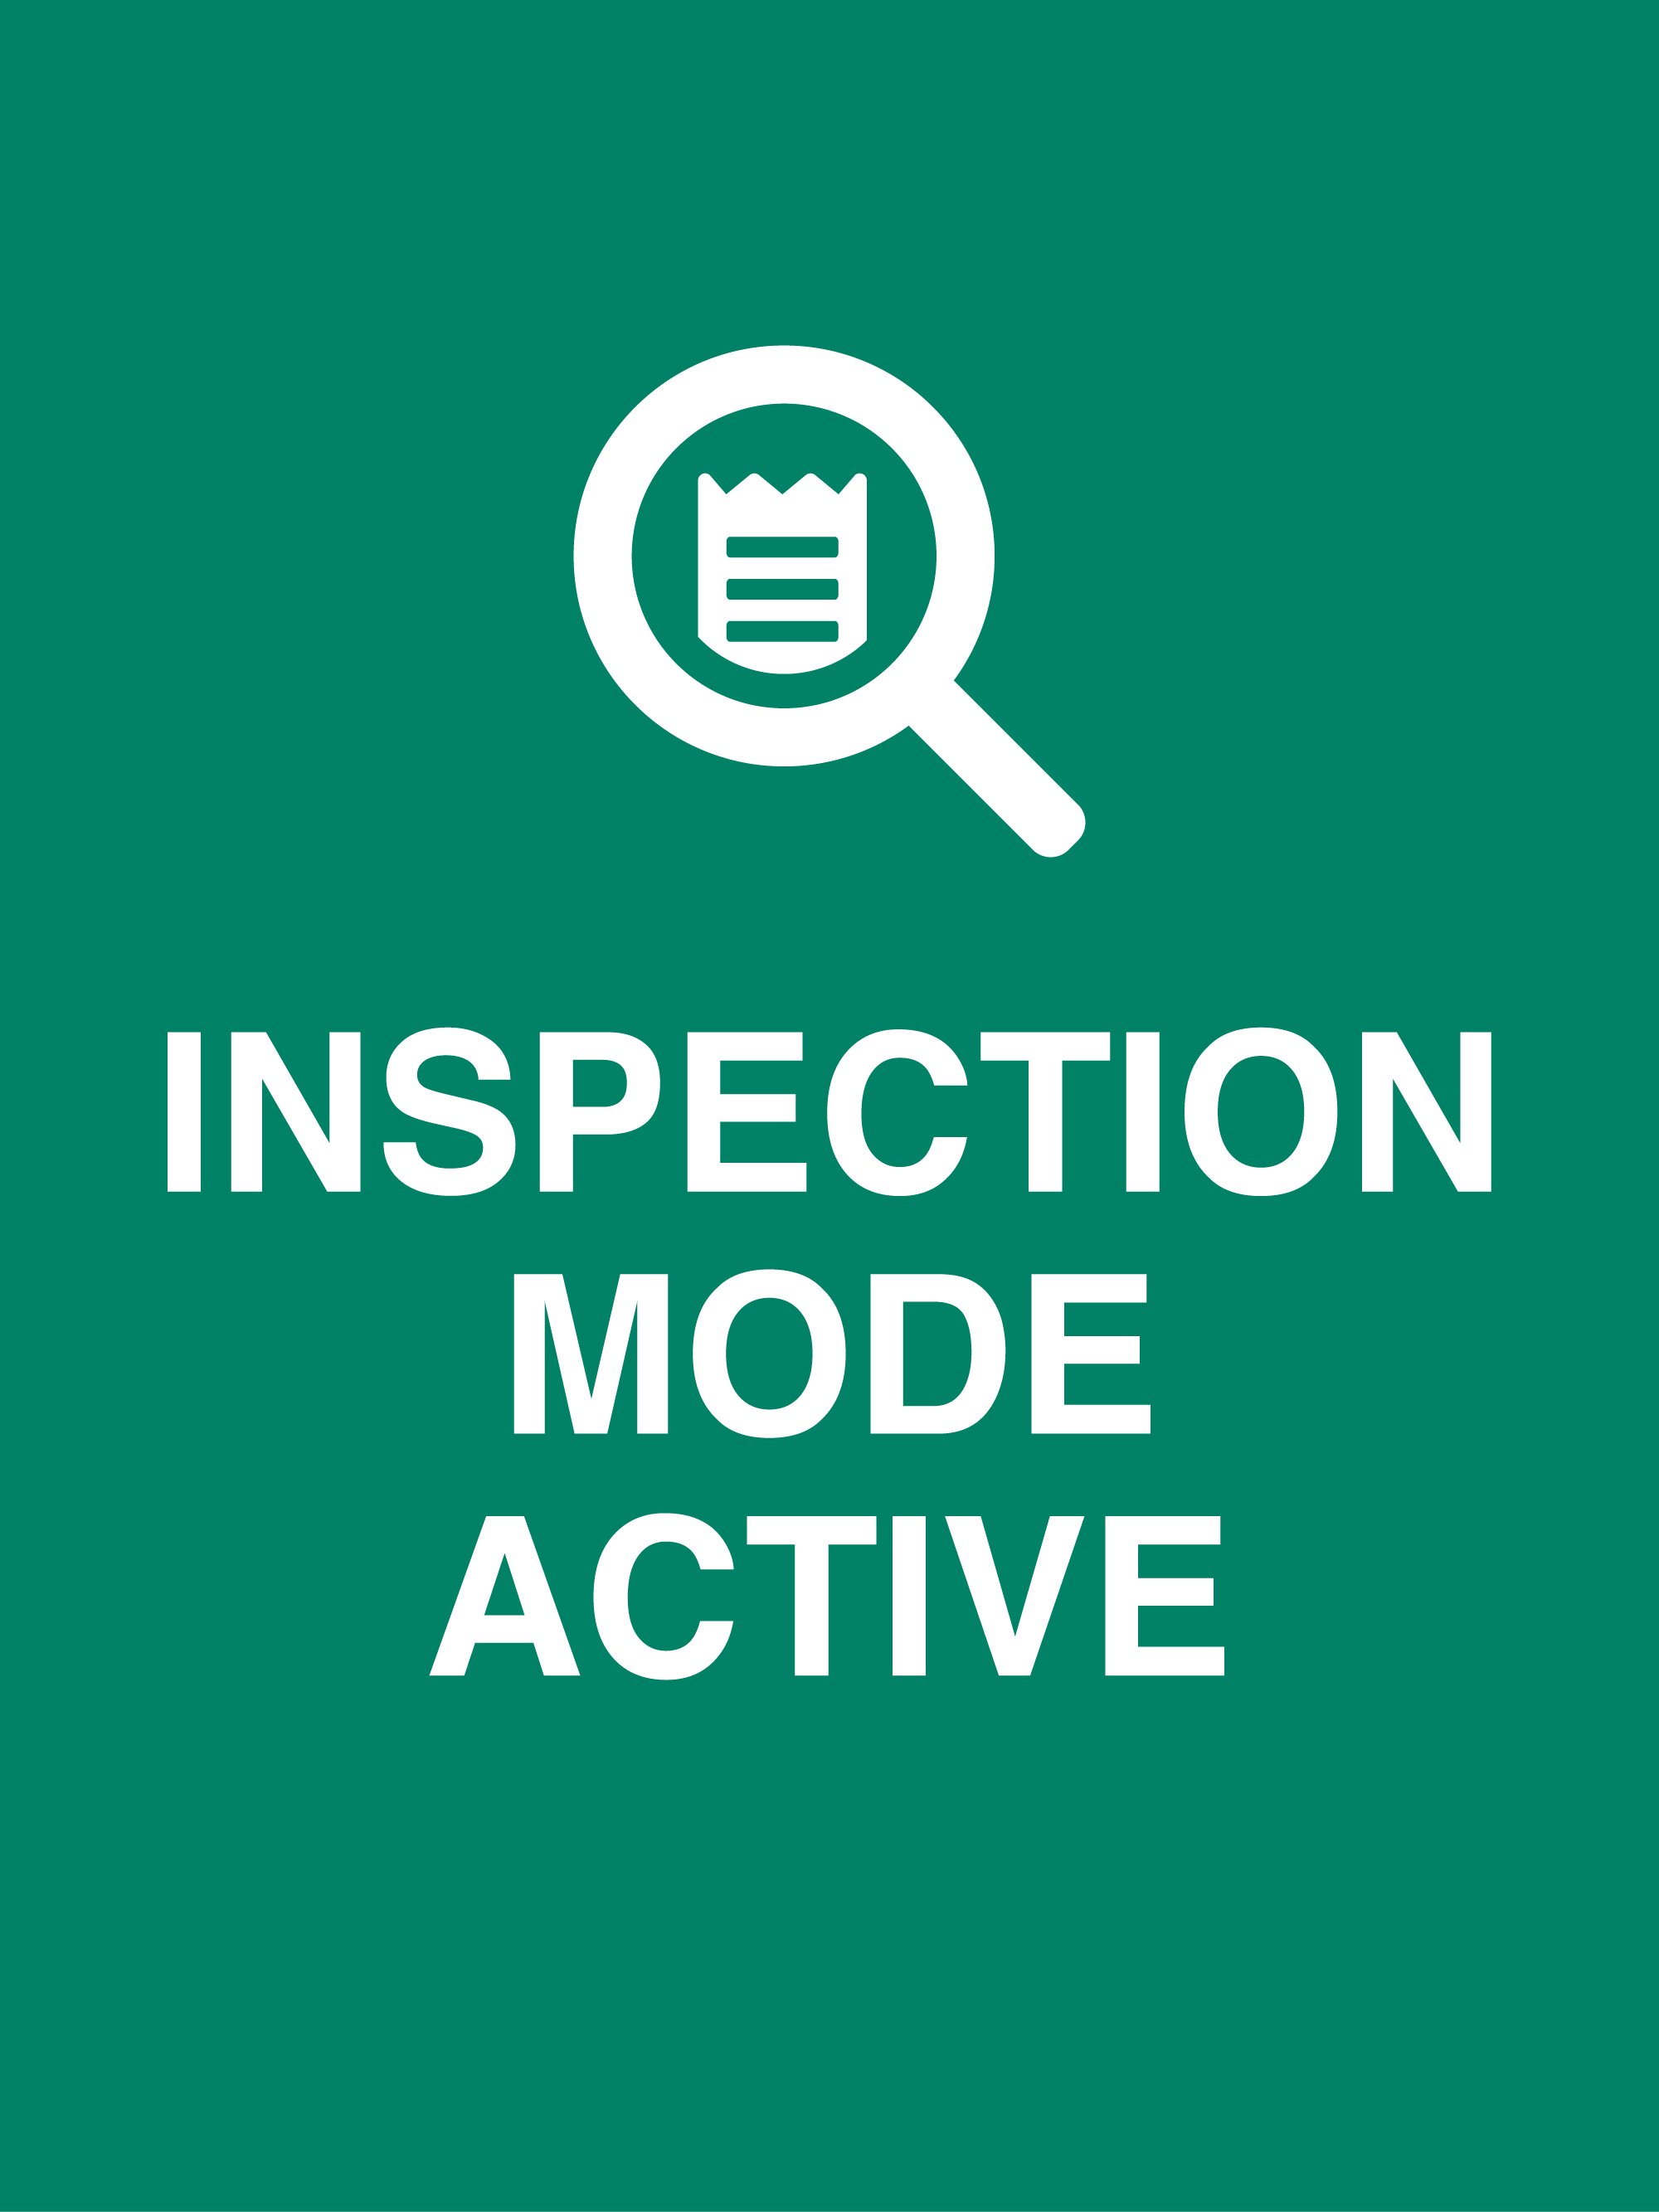 Inspection mode active